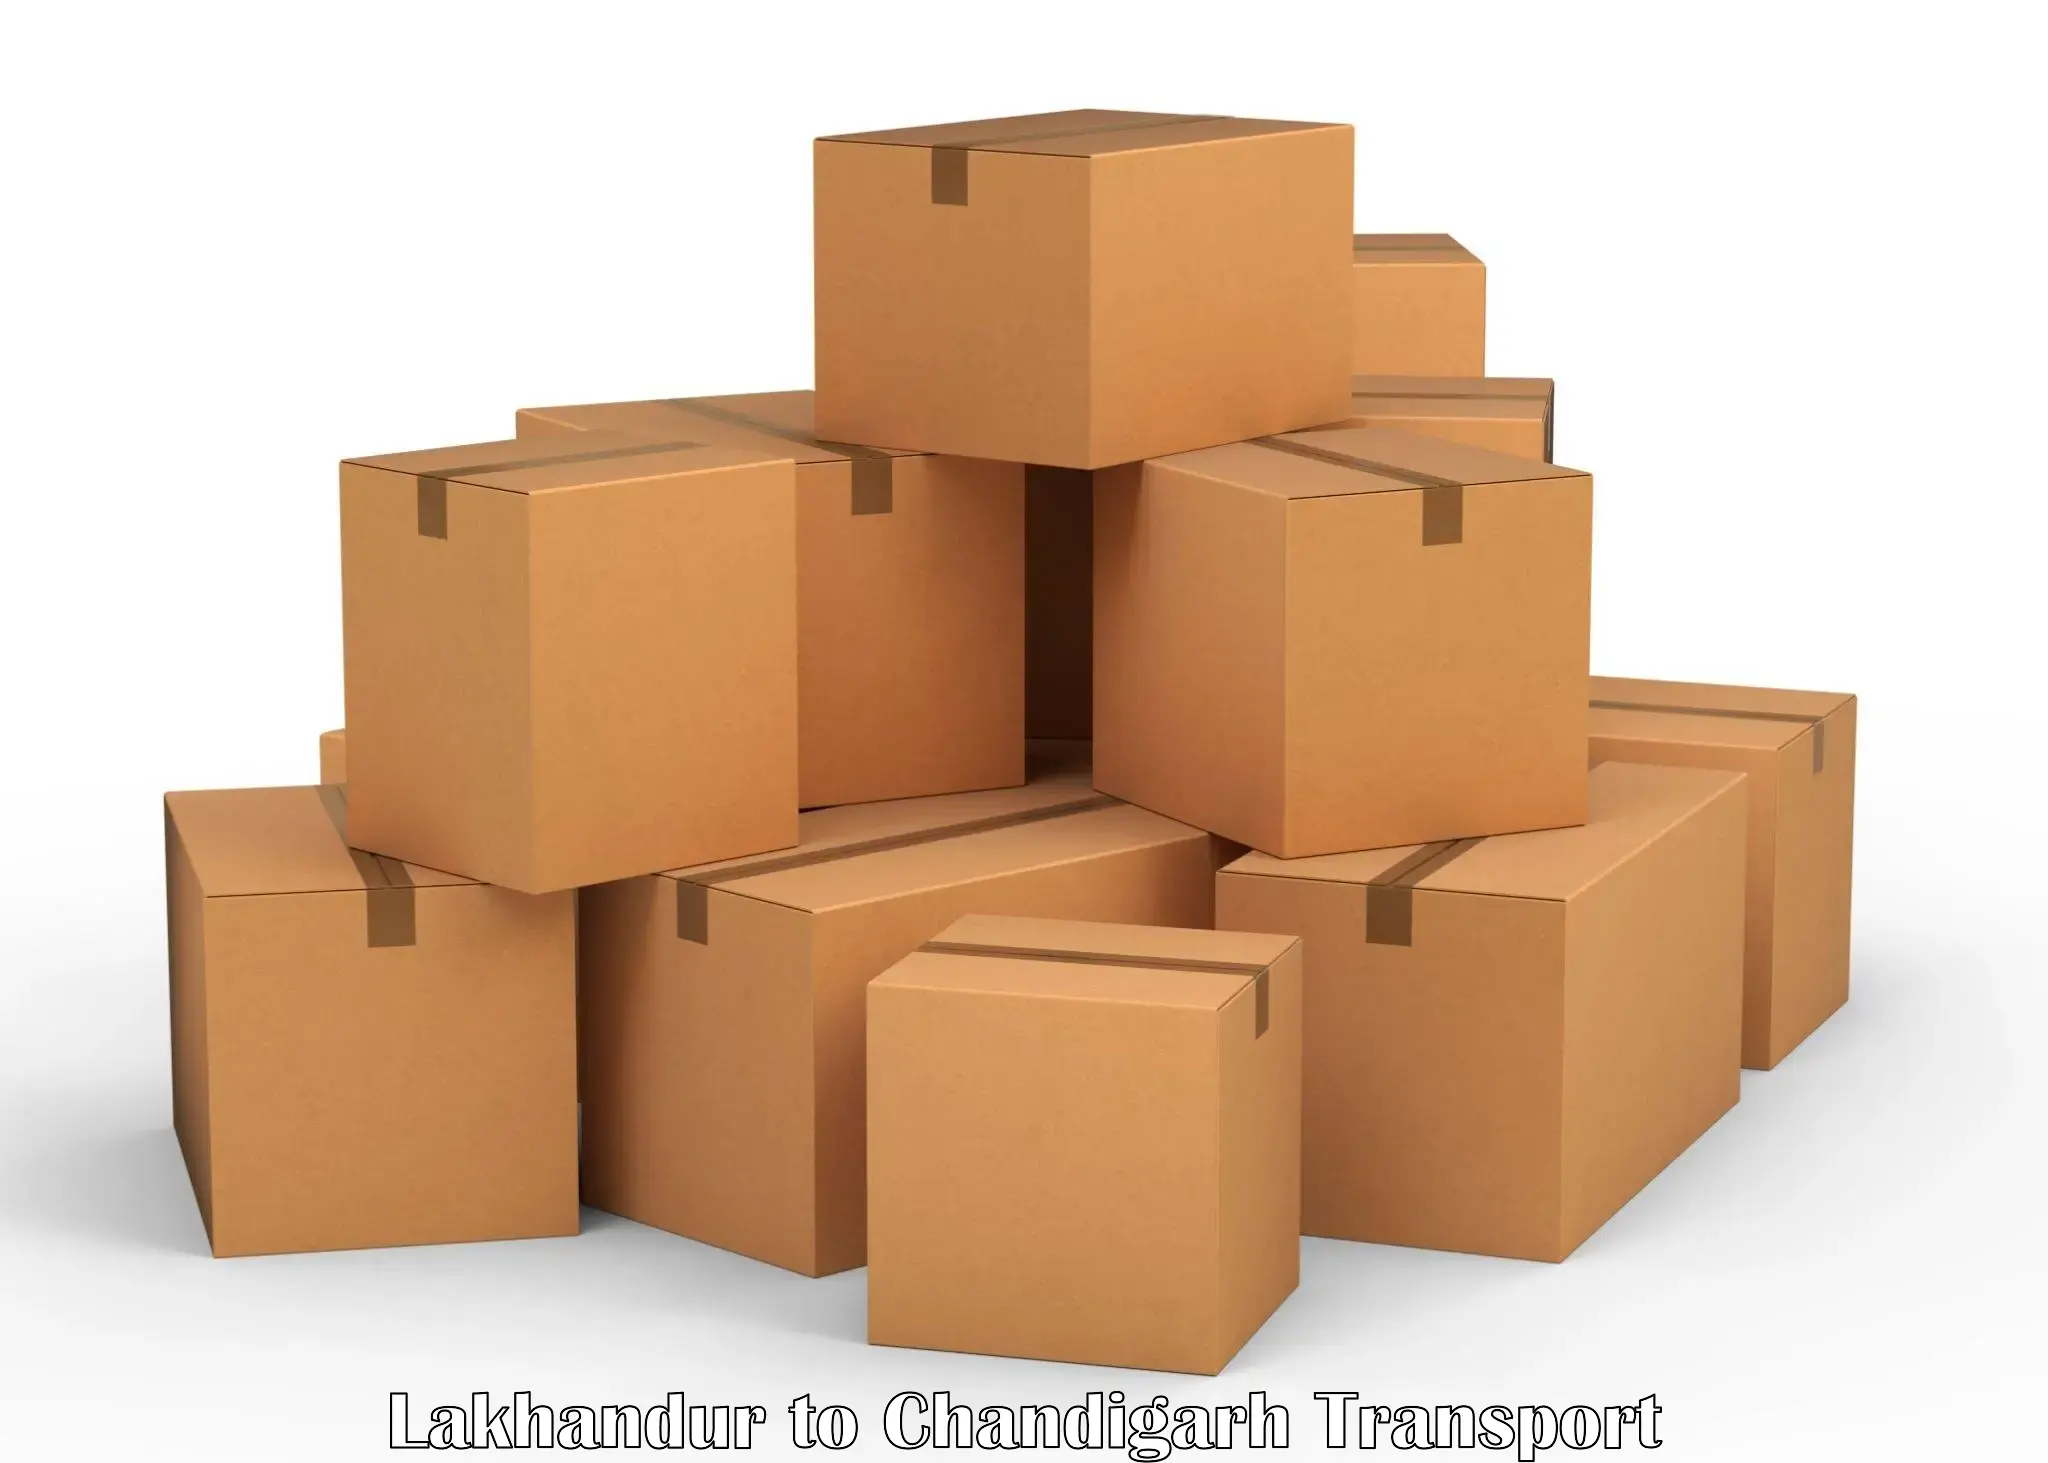 Goods delivery service Lakhandur to Chandigarh